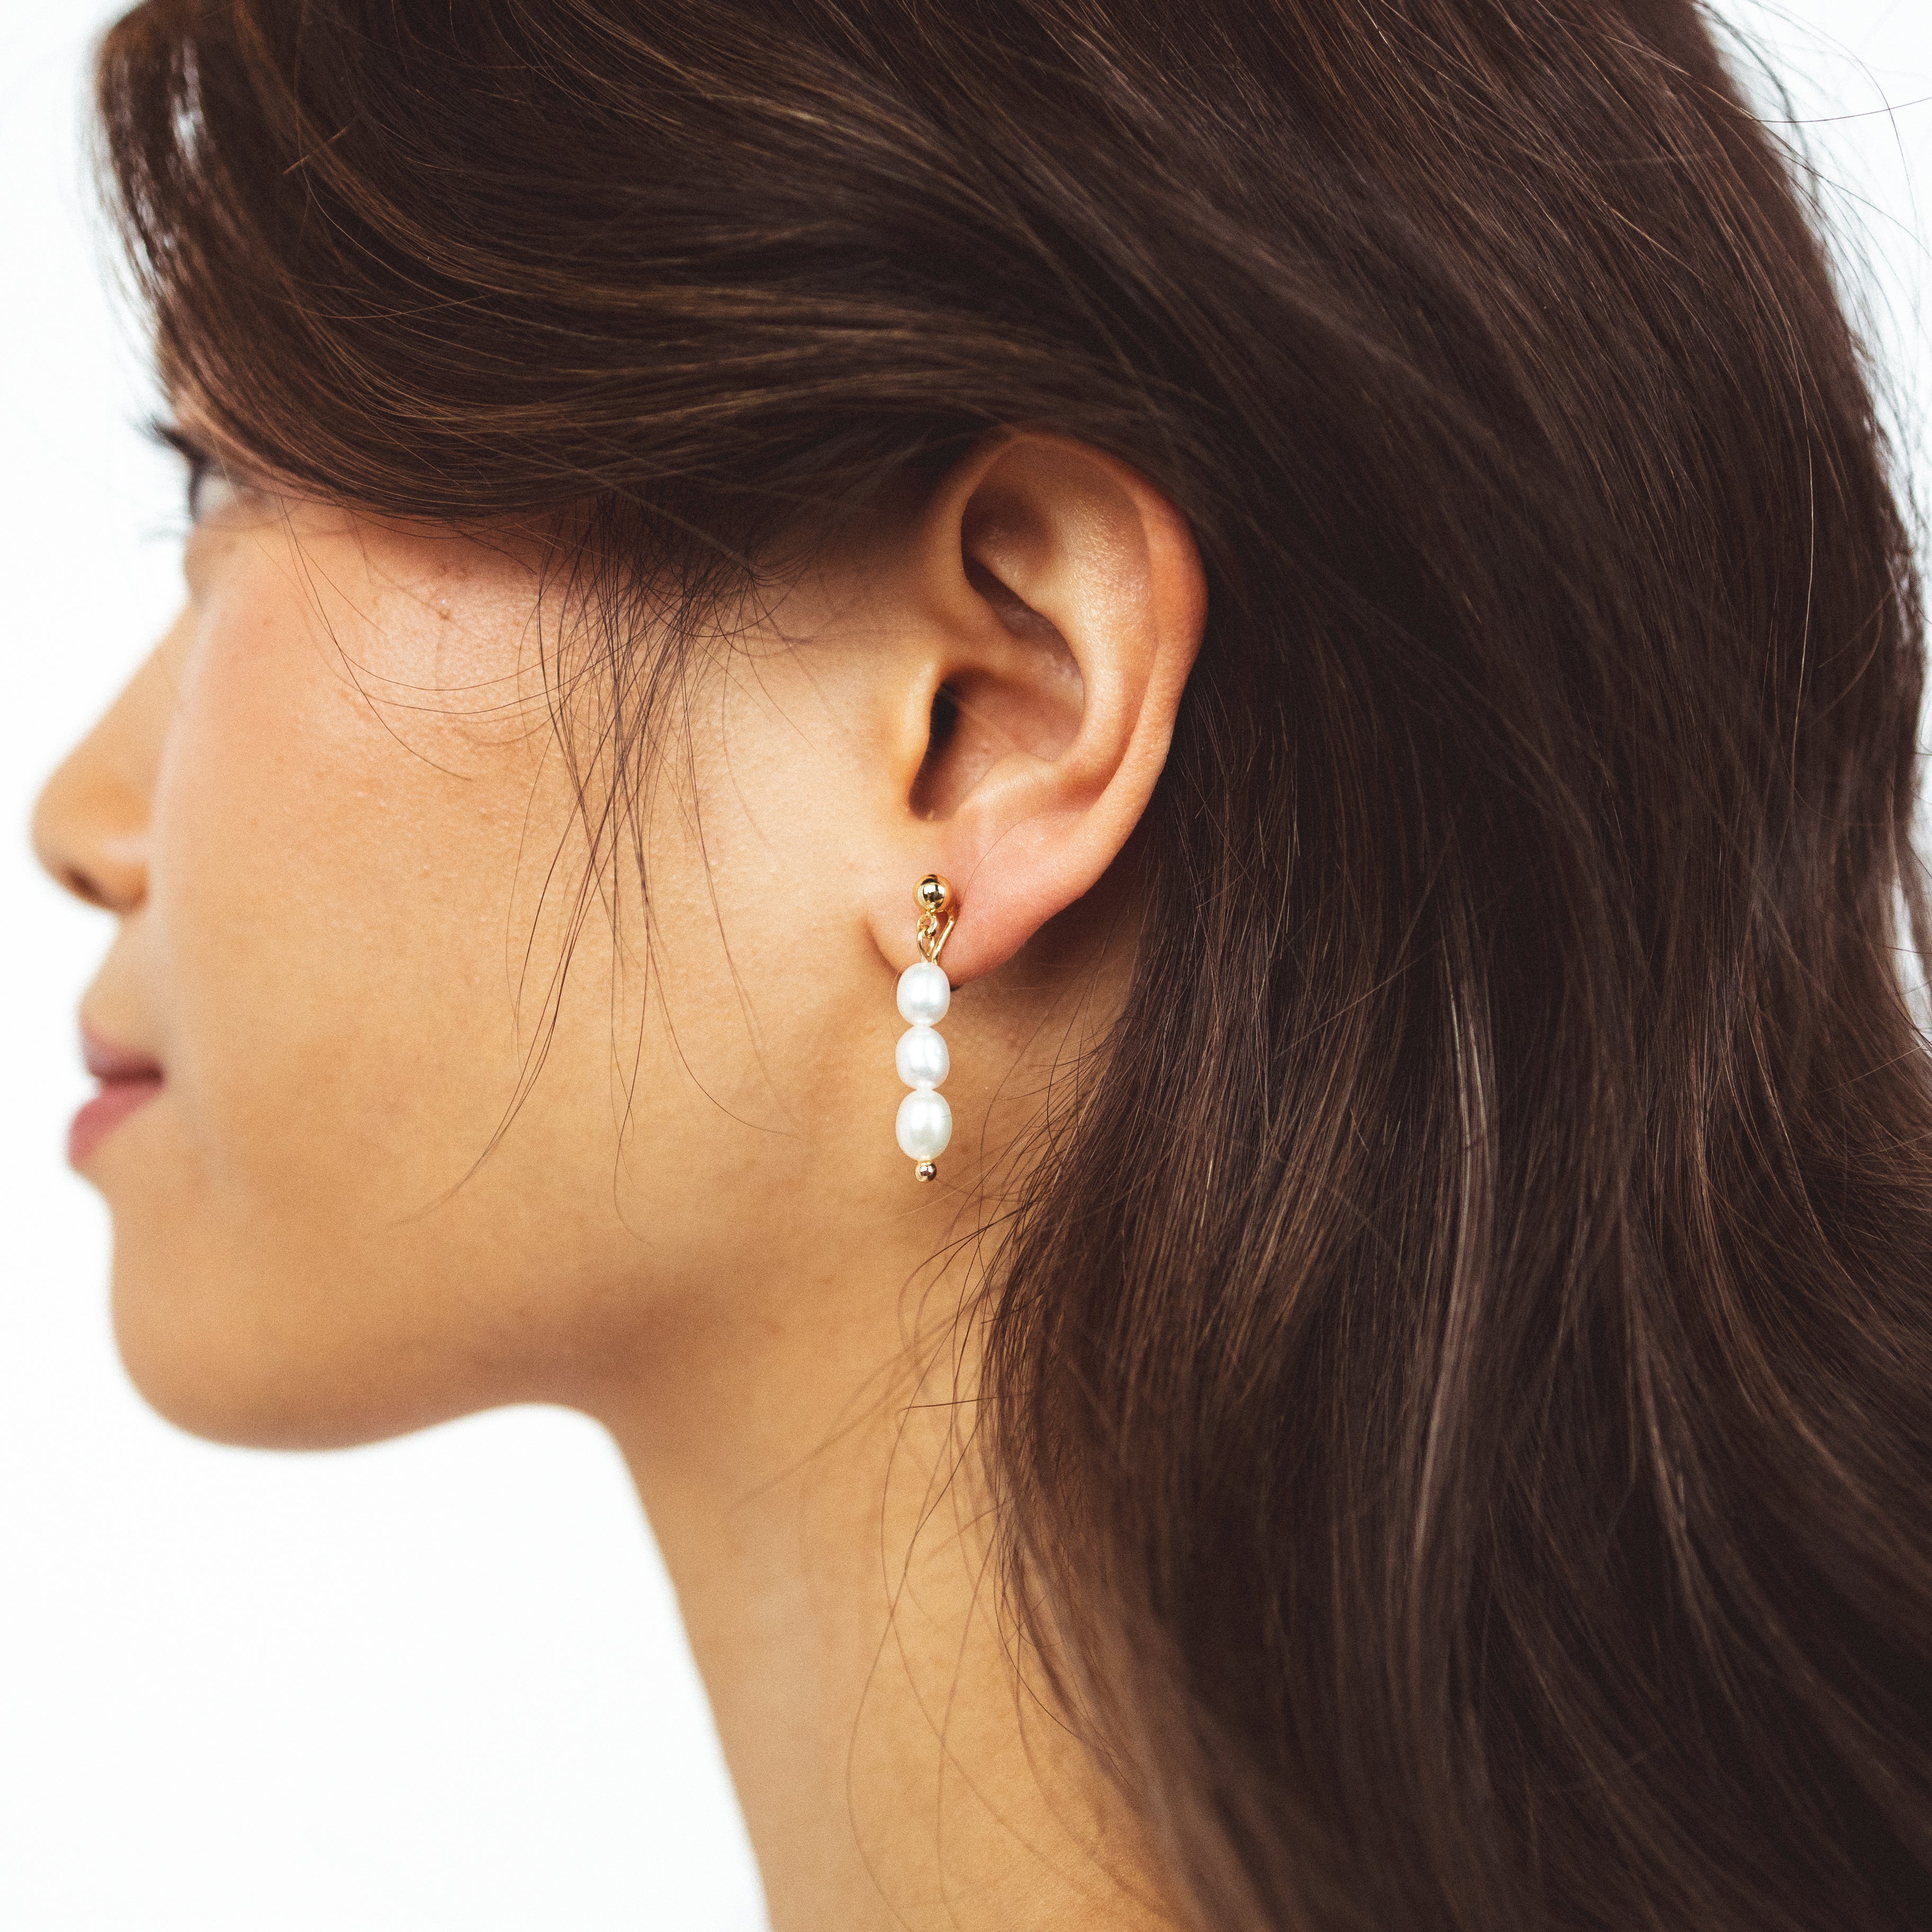 A model wearing the Audrey Clip On Earrings. These elegant earrings are adjustable for any ear type and provide a secure and comfortable hold for up to 24 hours. Perfect for sensitive or stretched ears, add a touch of sophistication to your daily style.